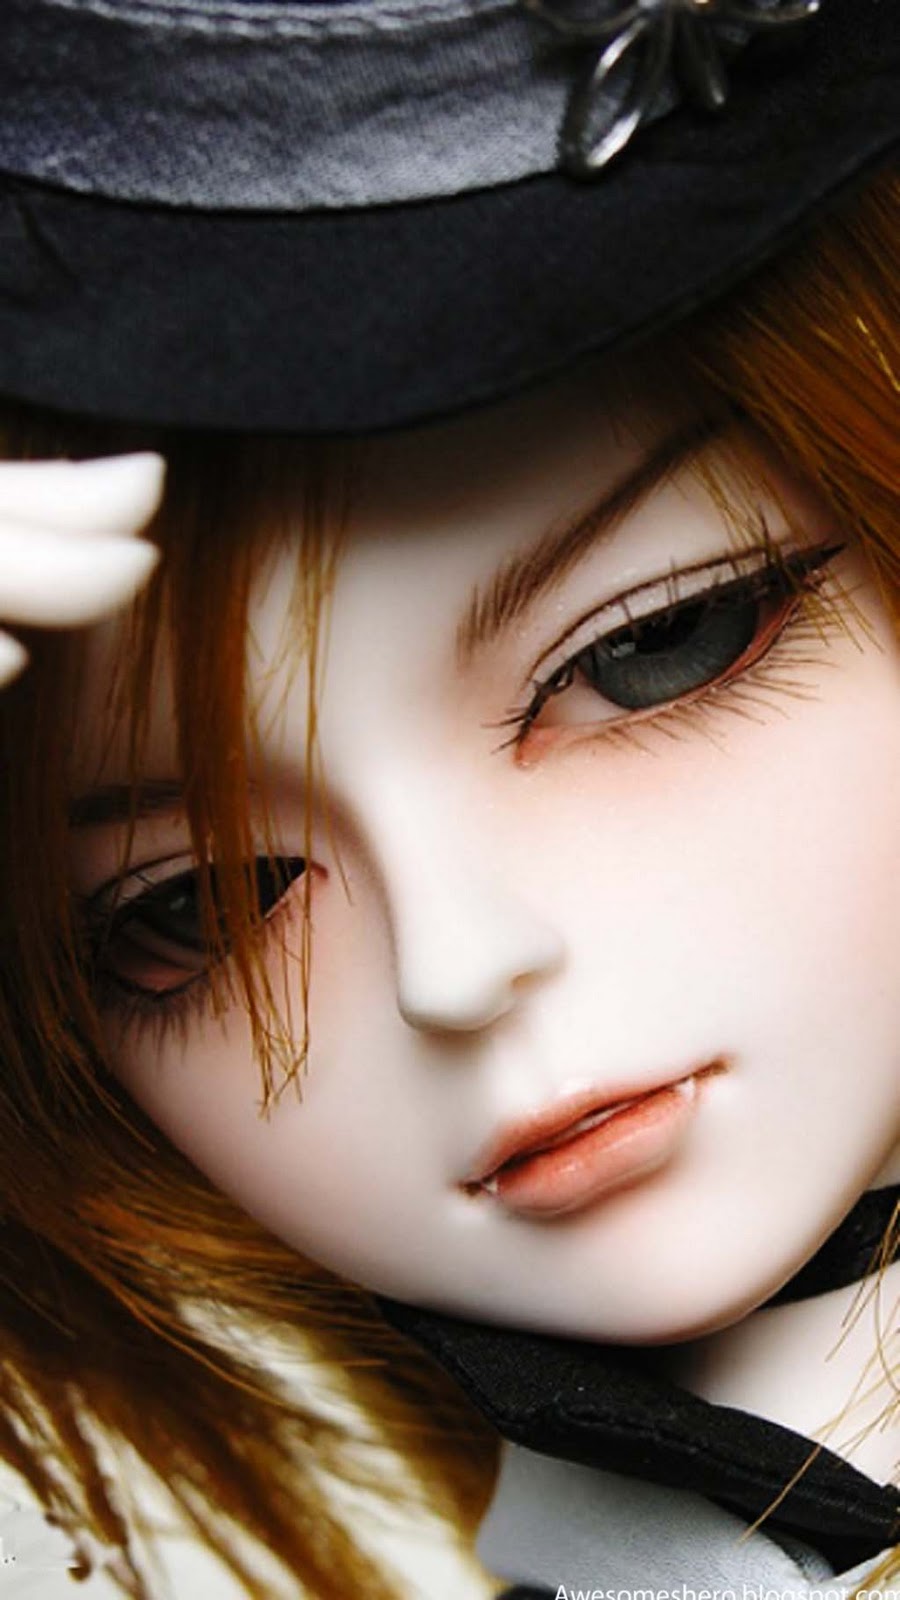 Beautiful Dolls Free Download Wallpapers Awesome wallpapers